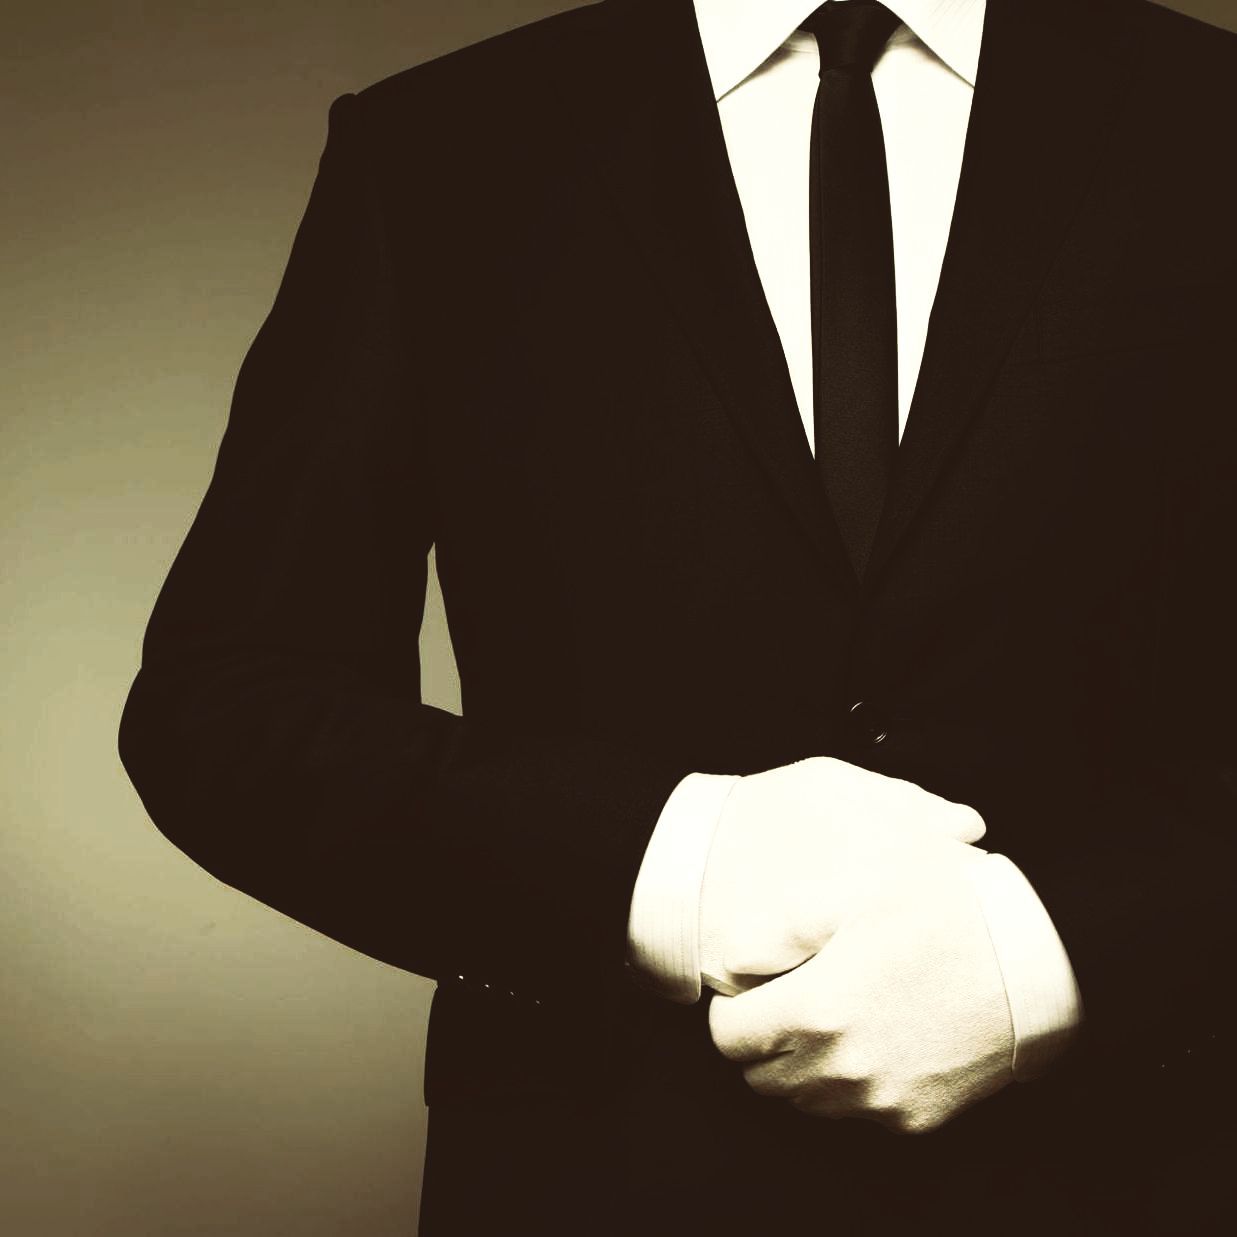 A man in a suit and tie is wearing white gloves